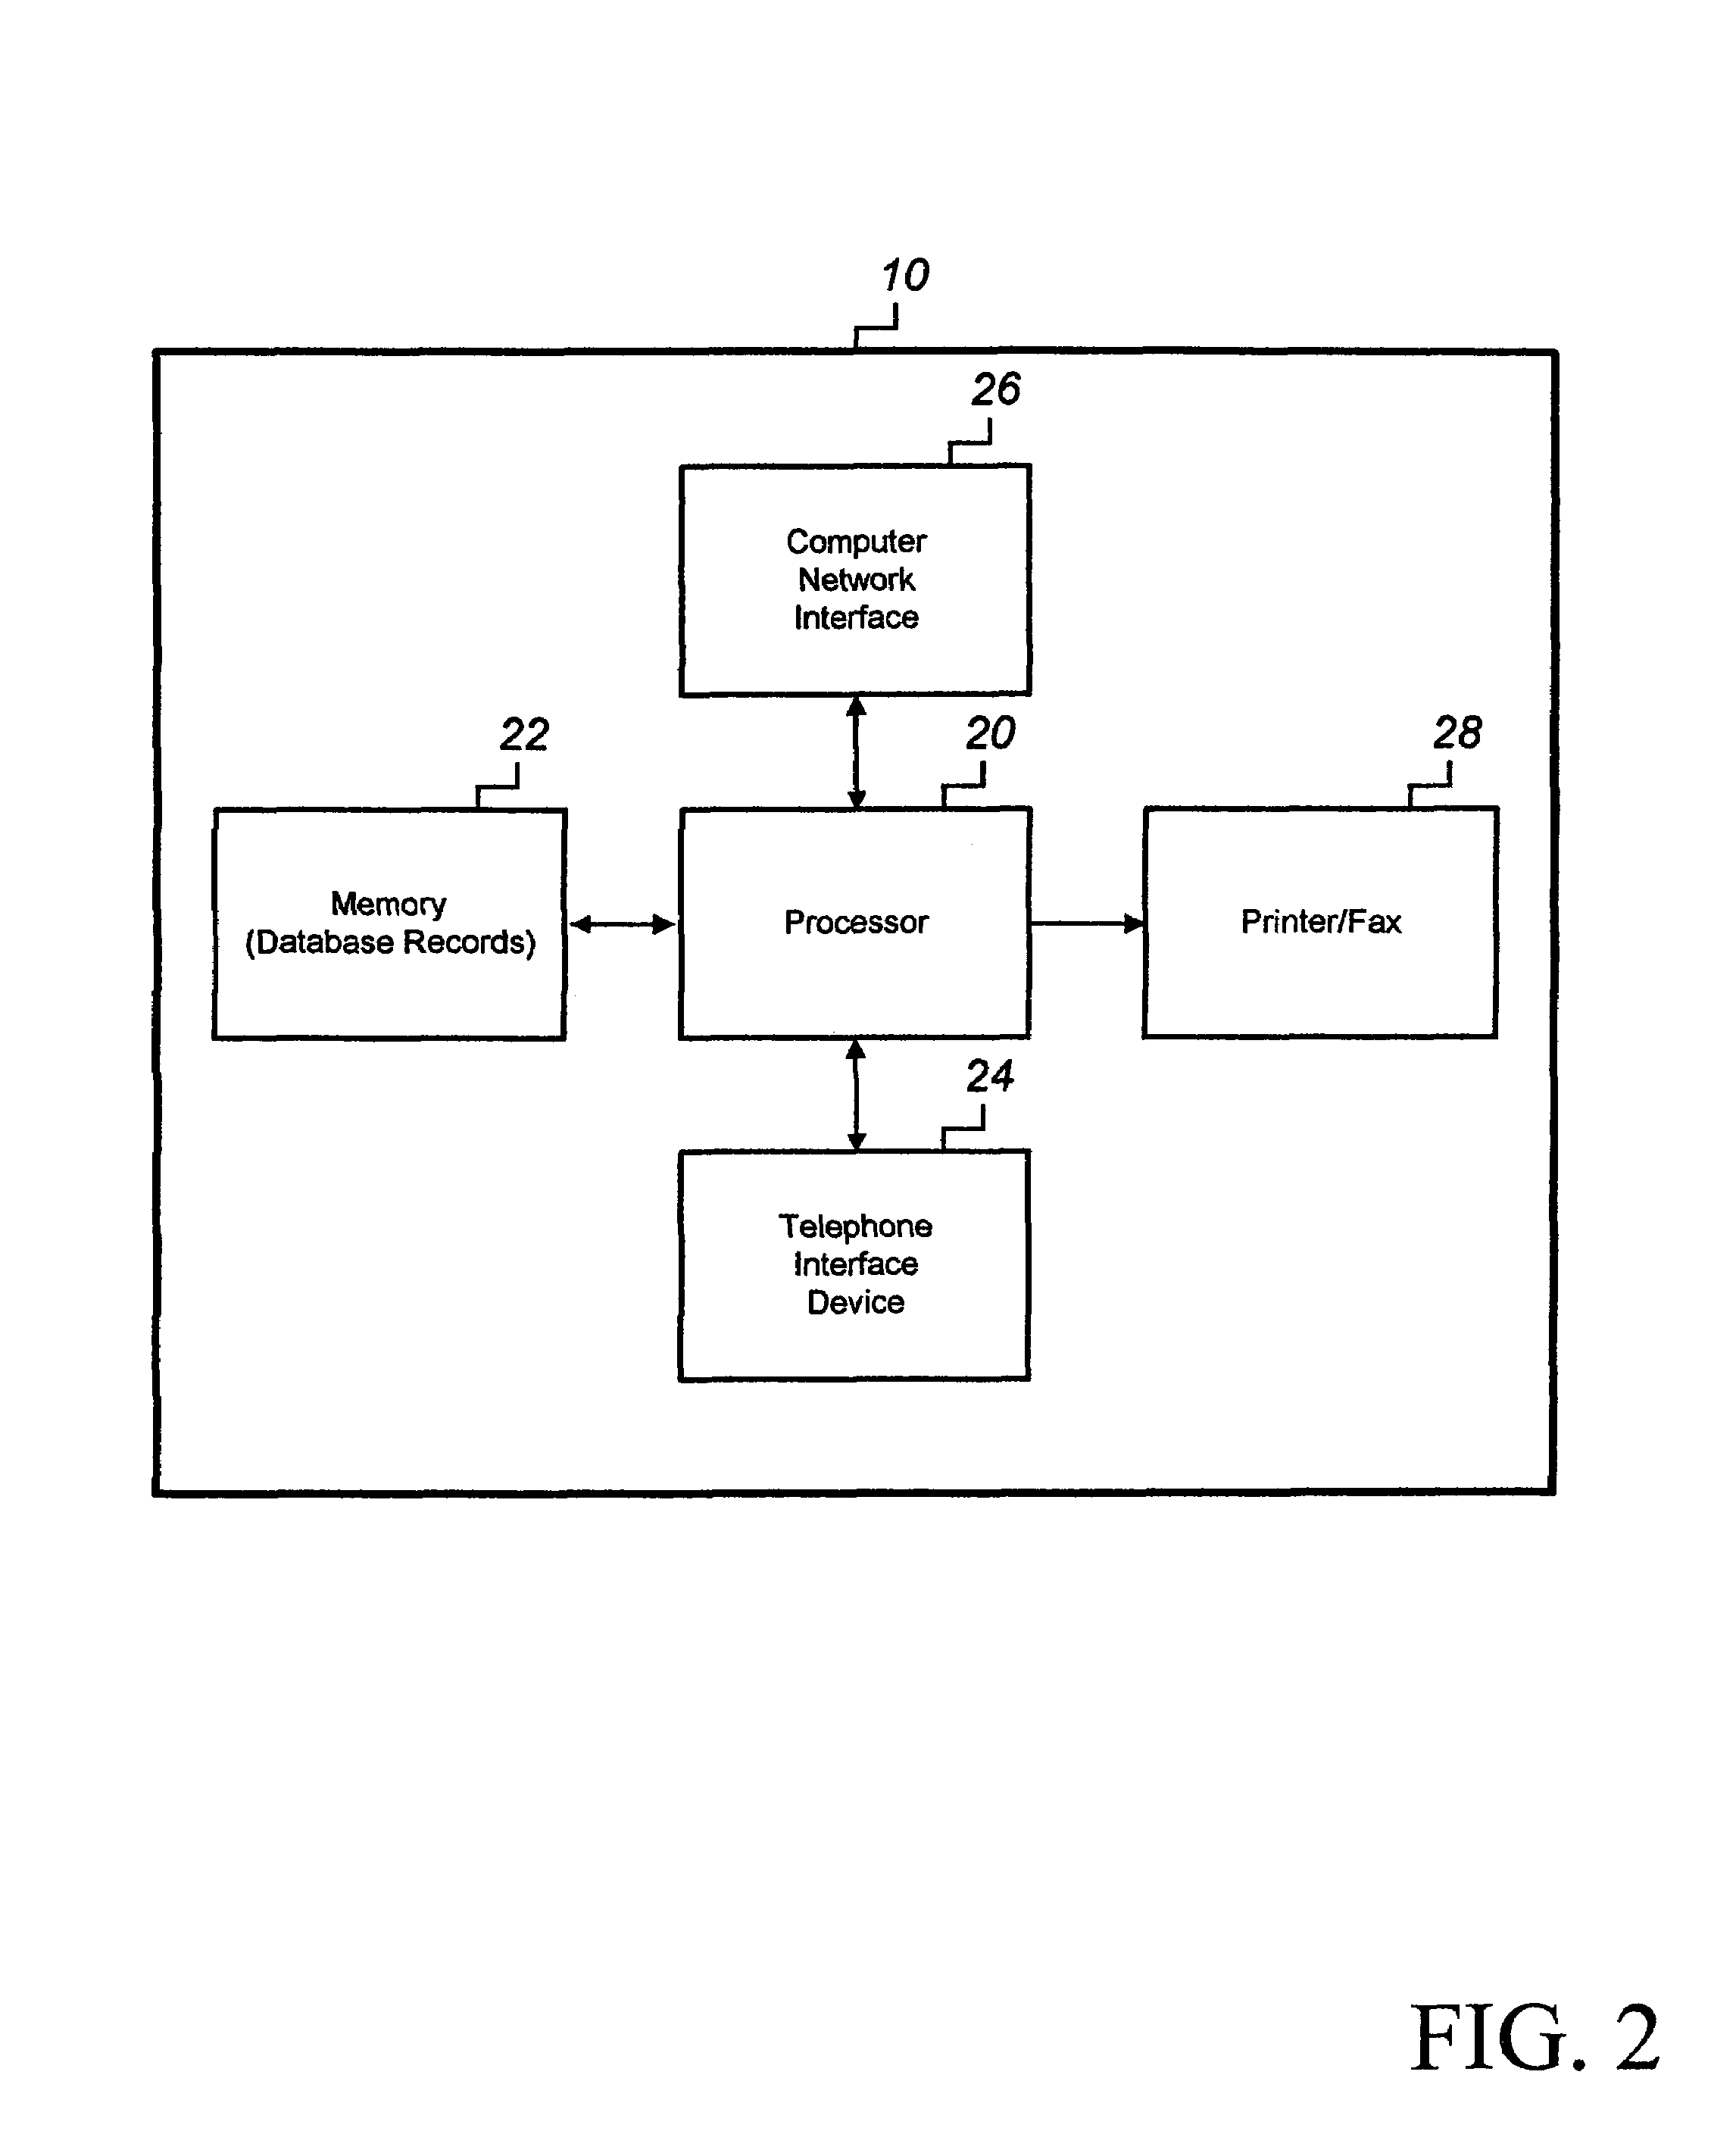 System for merchandise ordering and order fulfillment